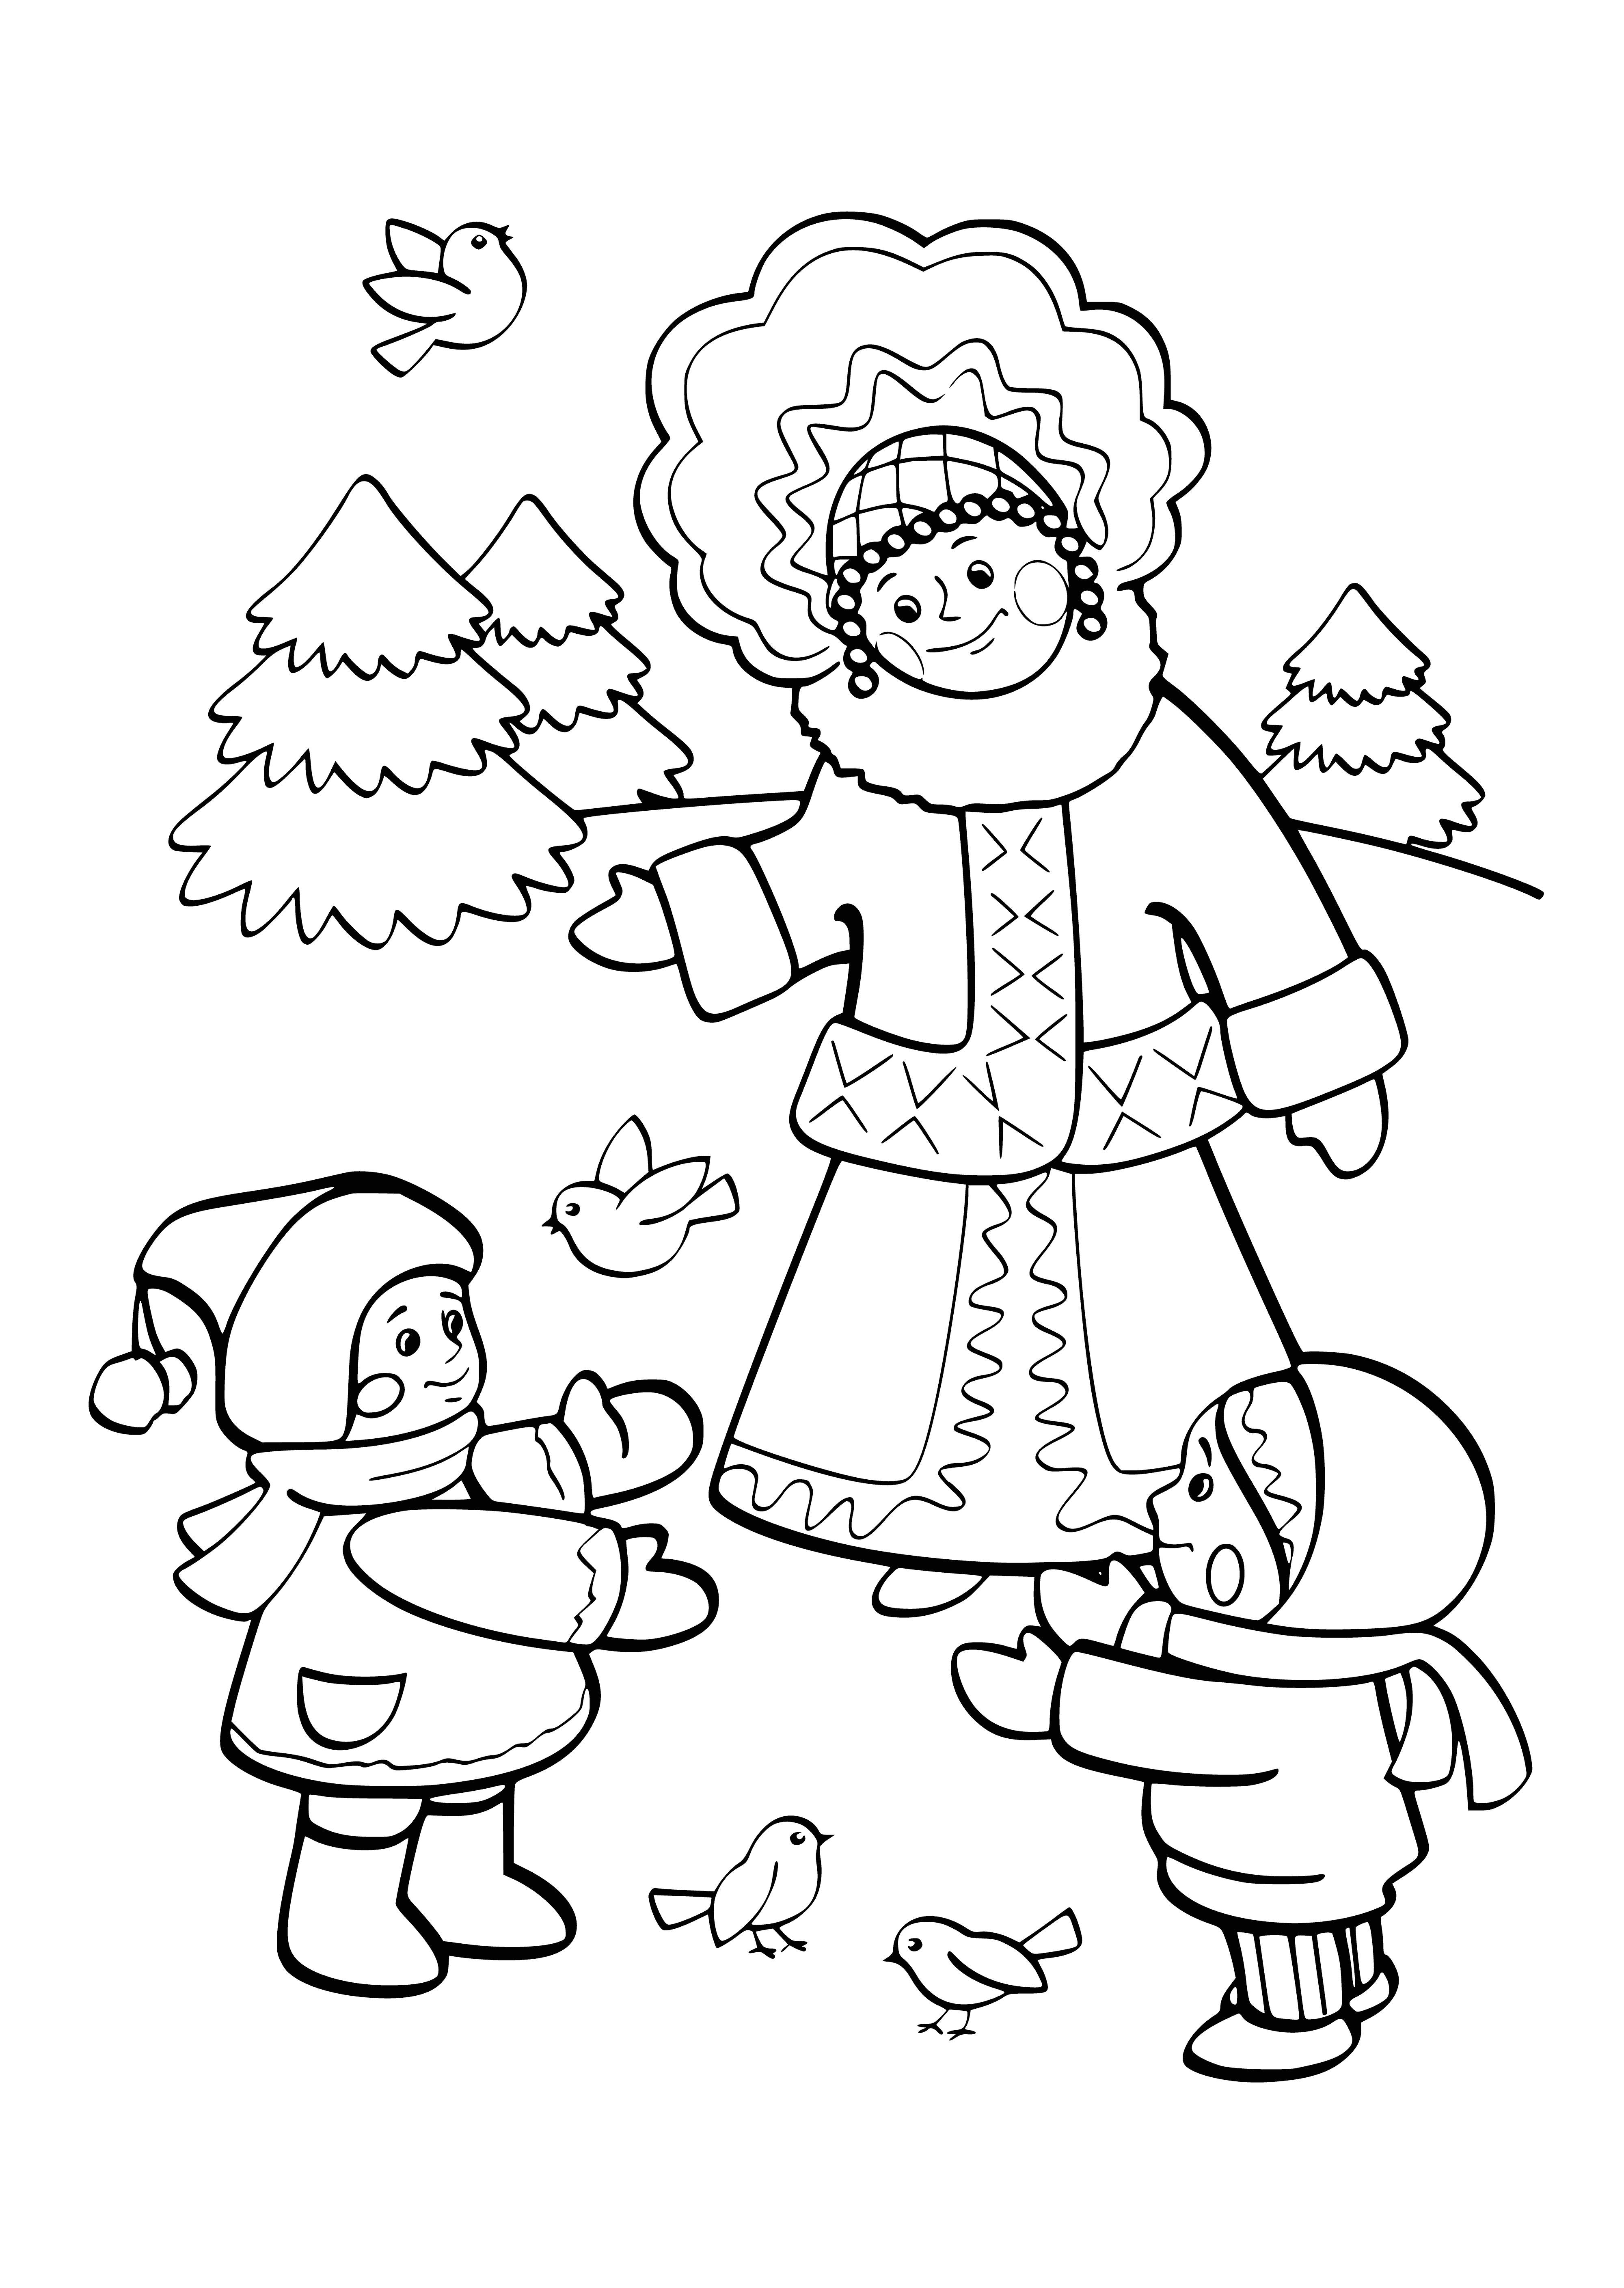 coloring page: Snow Maiden stands in the snow w/kids wearing a white dress & hat. #children #winter